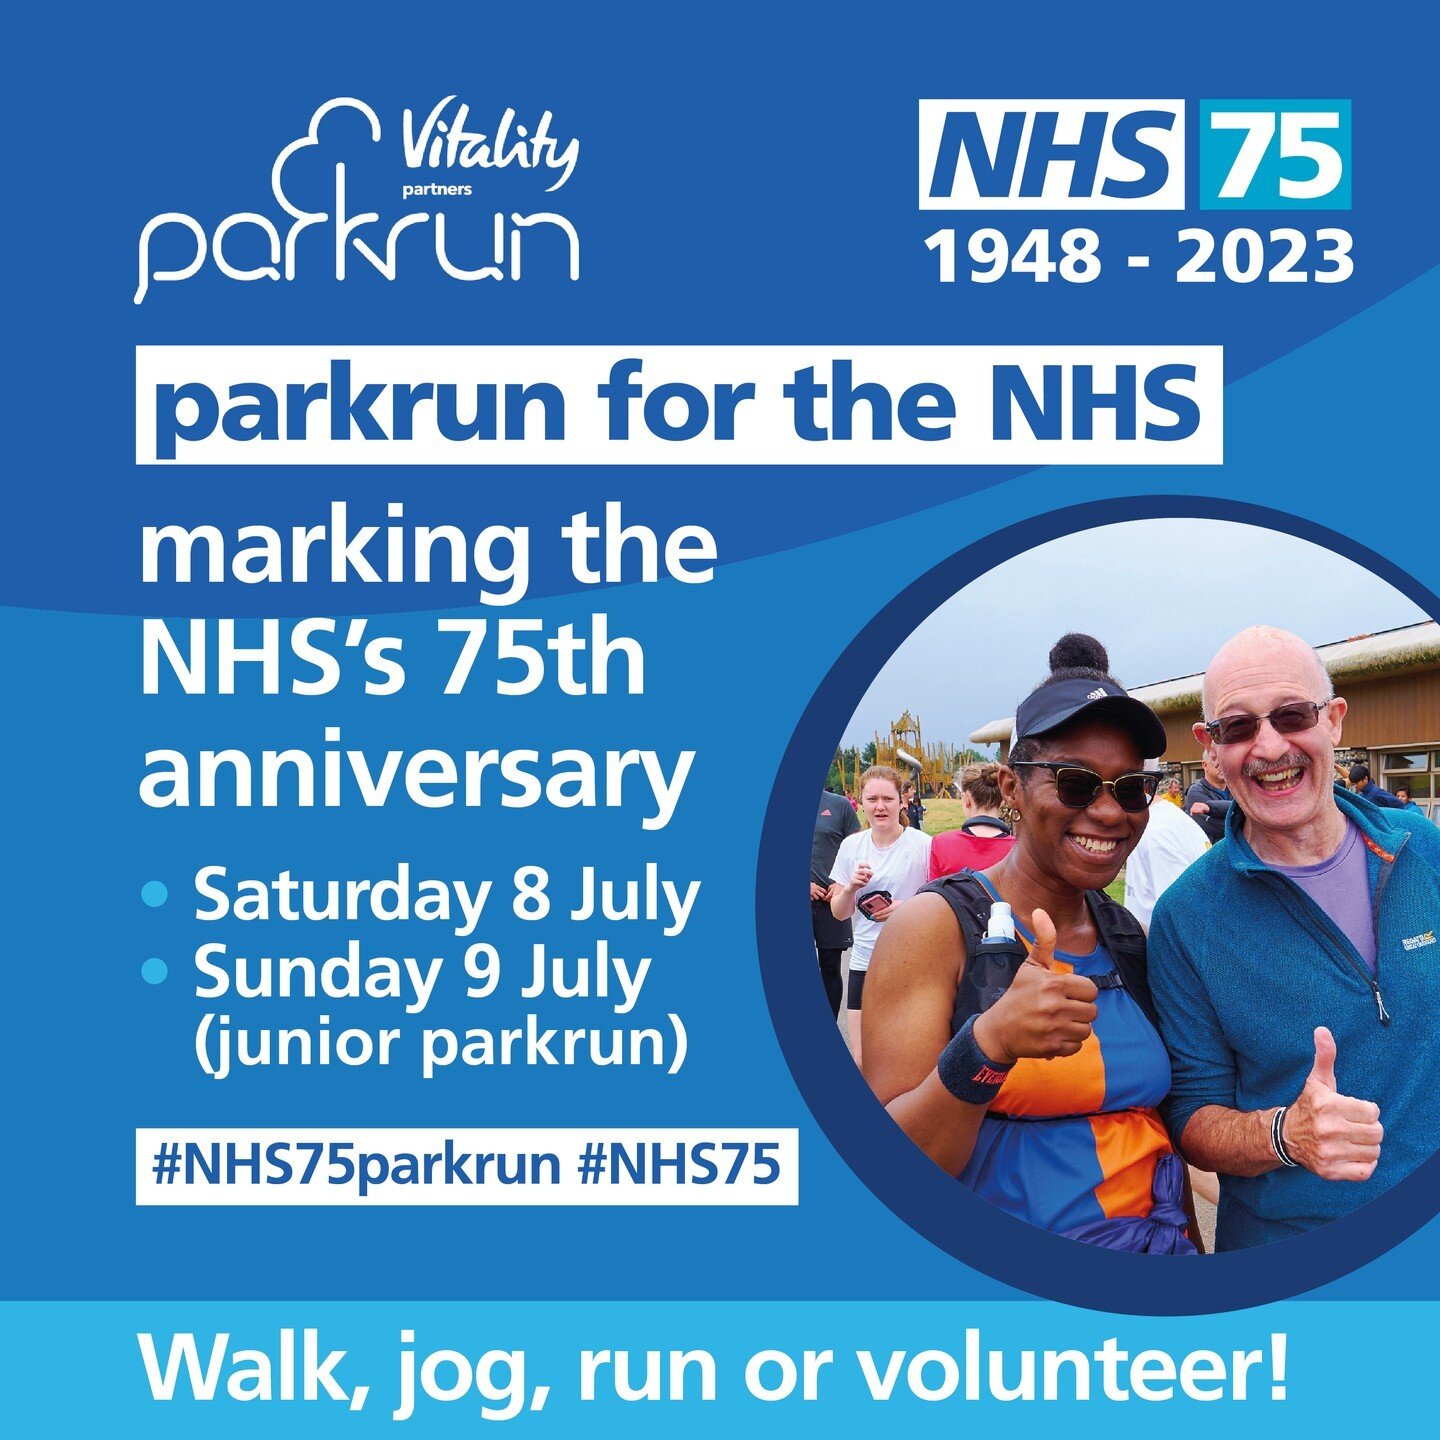 It's time to get a team together - let's #parkrunfortheNHS!🏃💙

Join in on Saturday 8th &amp; Sunday 9th July at your local parkrun to celebrate the NHS turning 75 years old!🎈

Choose a ward or department that matters the most to you at @hampshireh